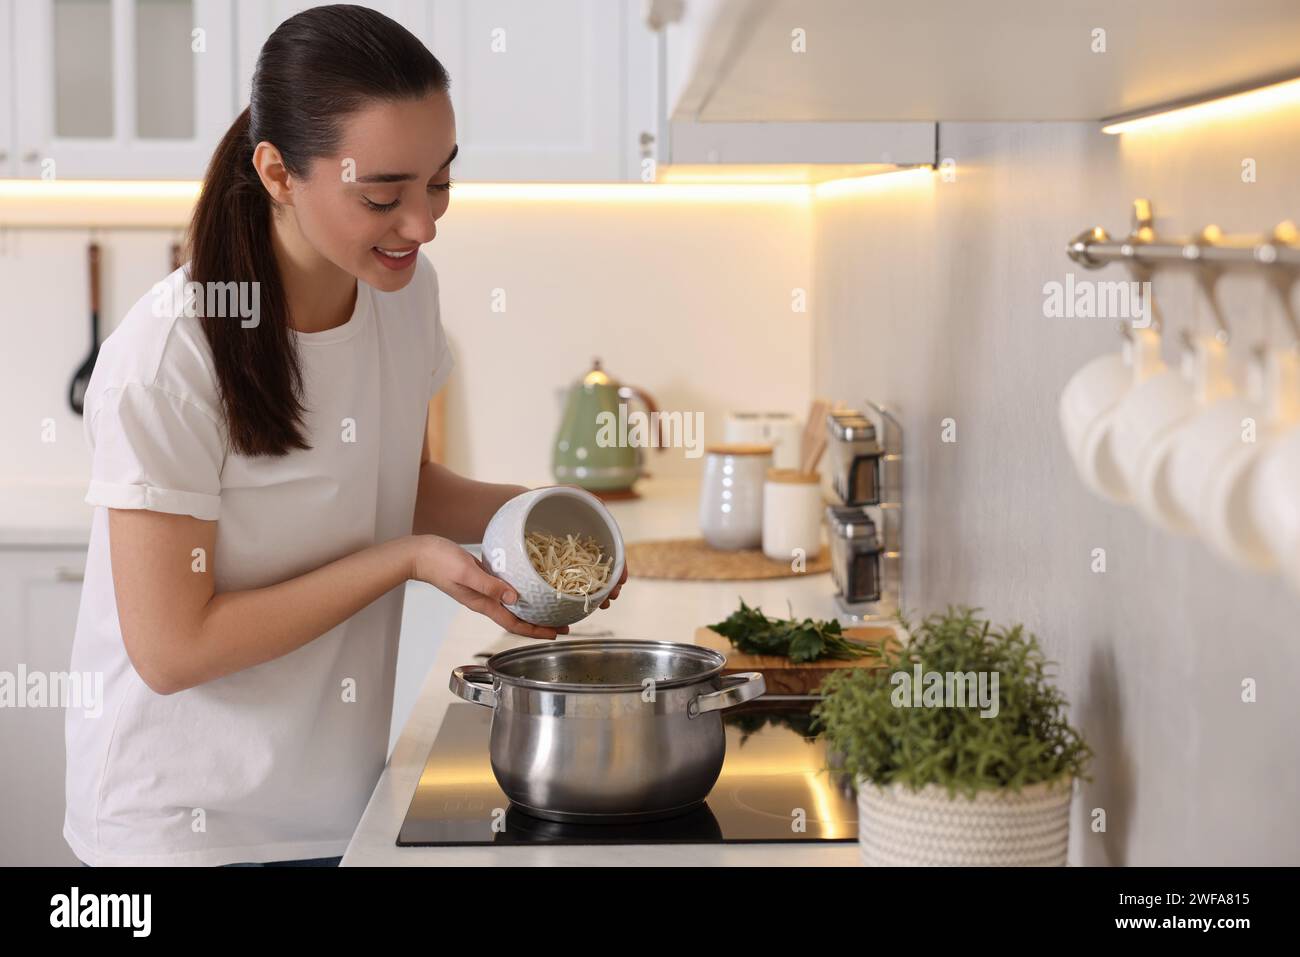 Smiling woman adding noodles into pot with soup in kitchen Stock Photo